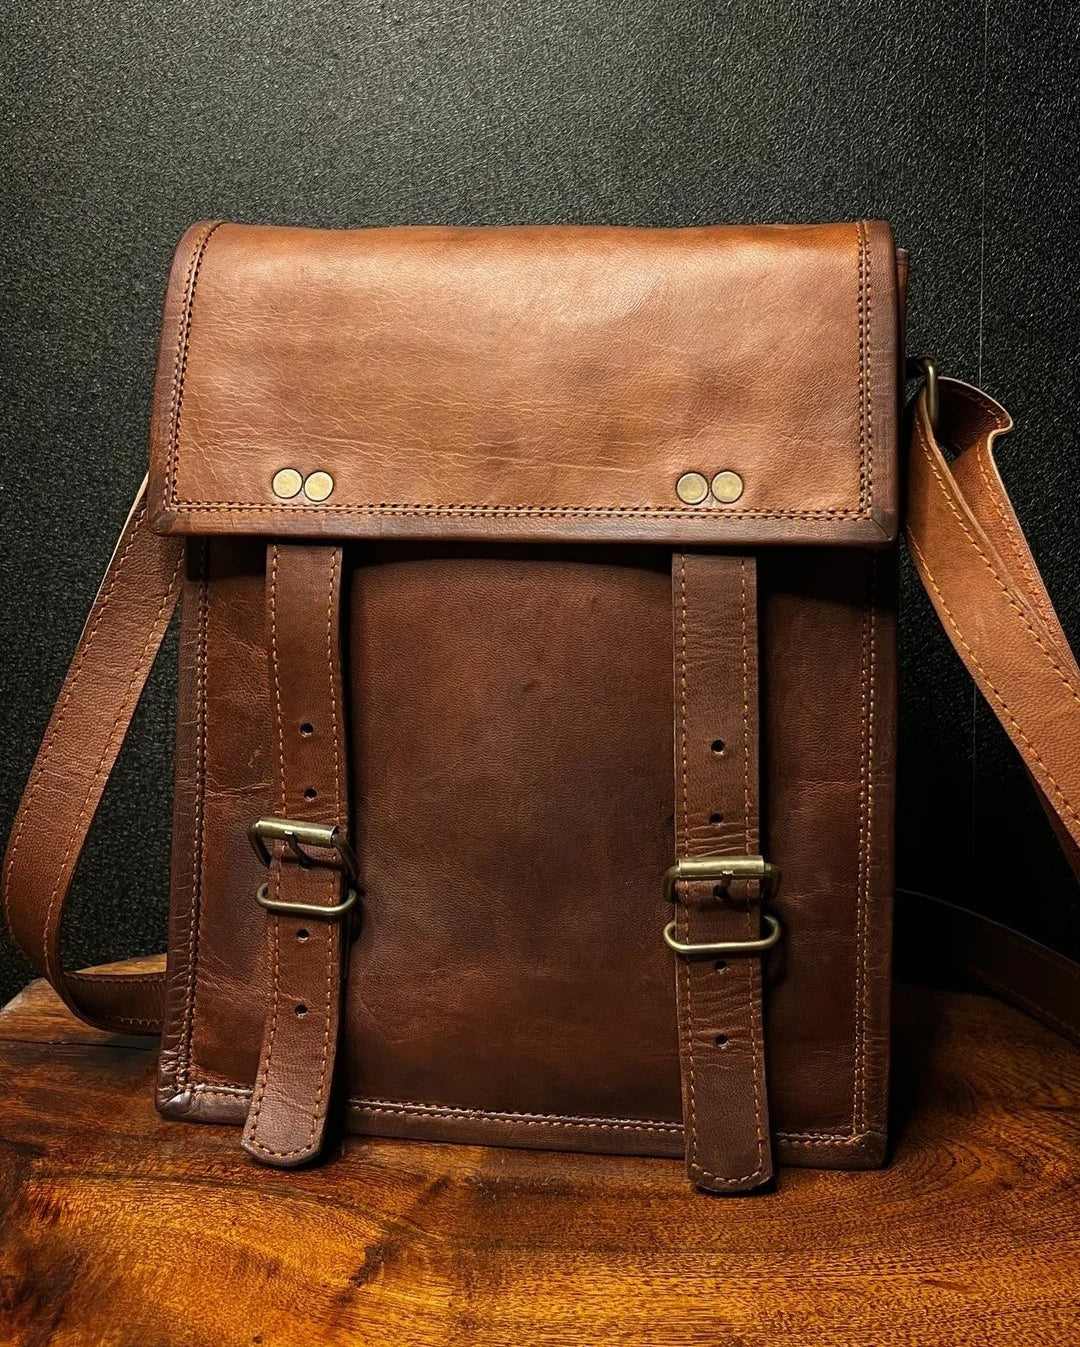  RUSTIC TOWN Leather Satchel iPad Tablet Bag - Leather